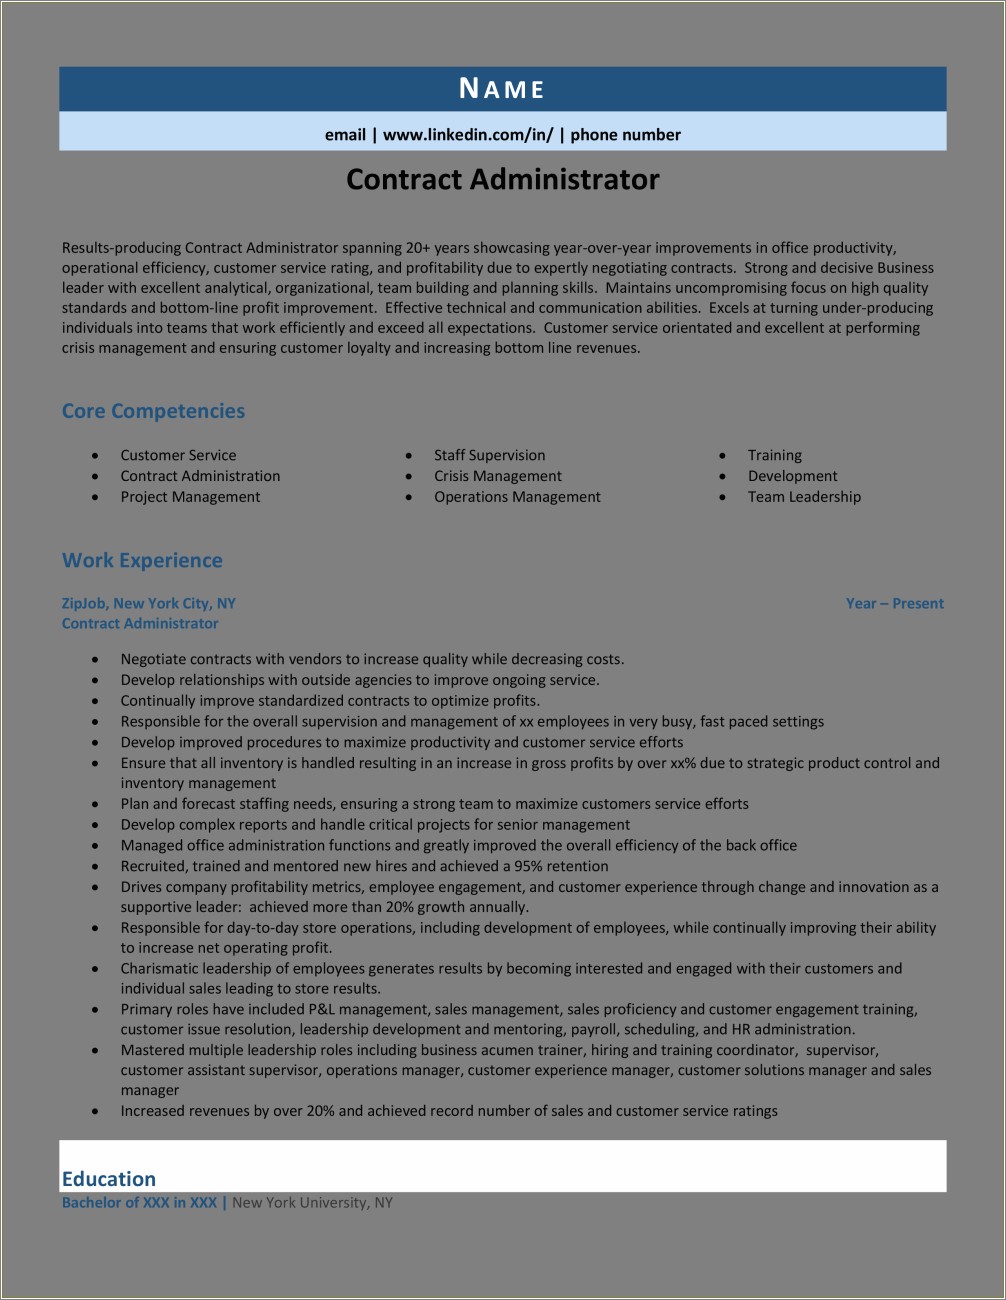 Resume Objective Statement For Contract Administrator